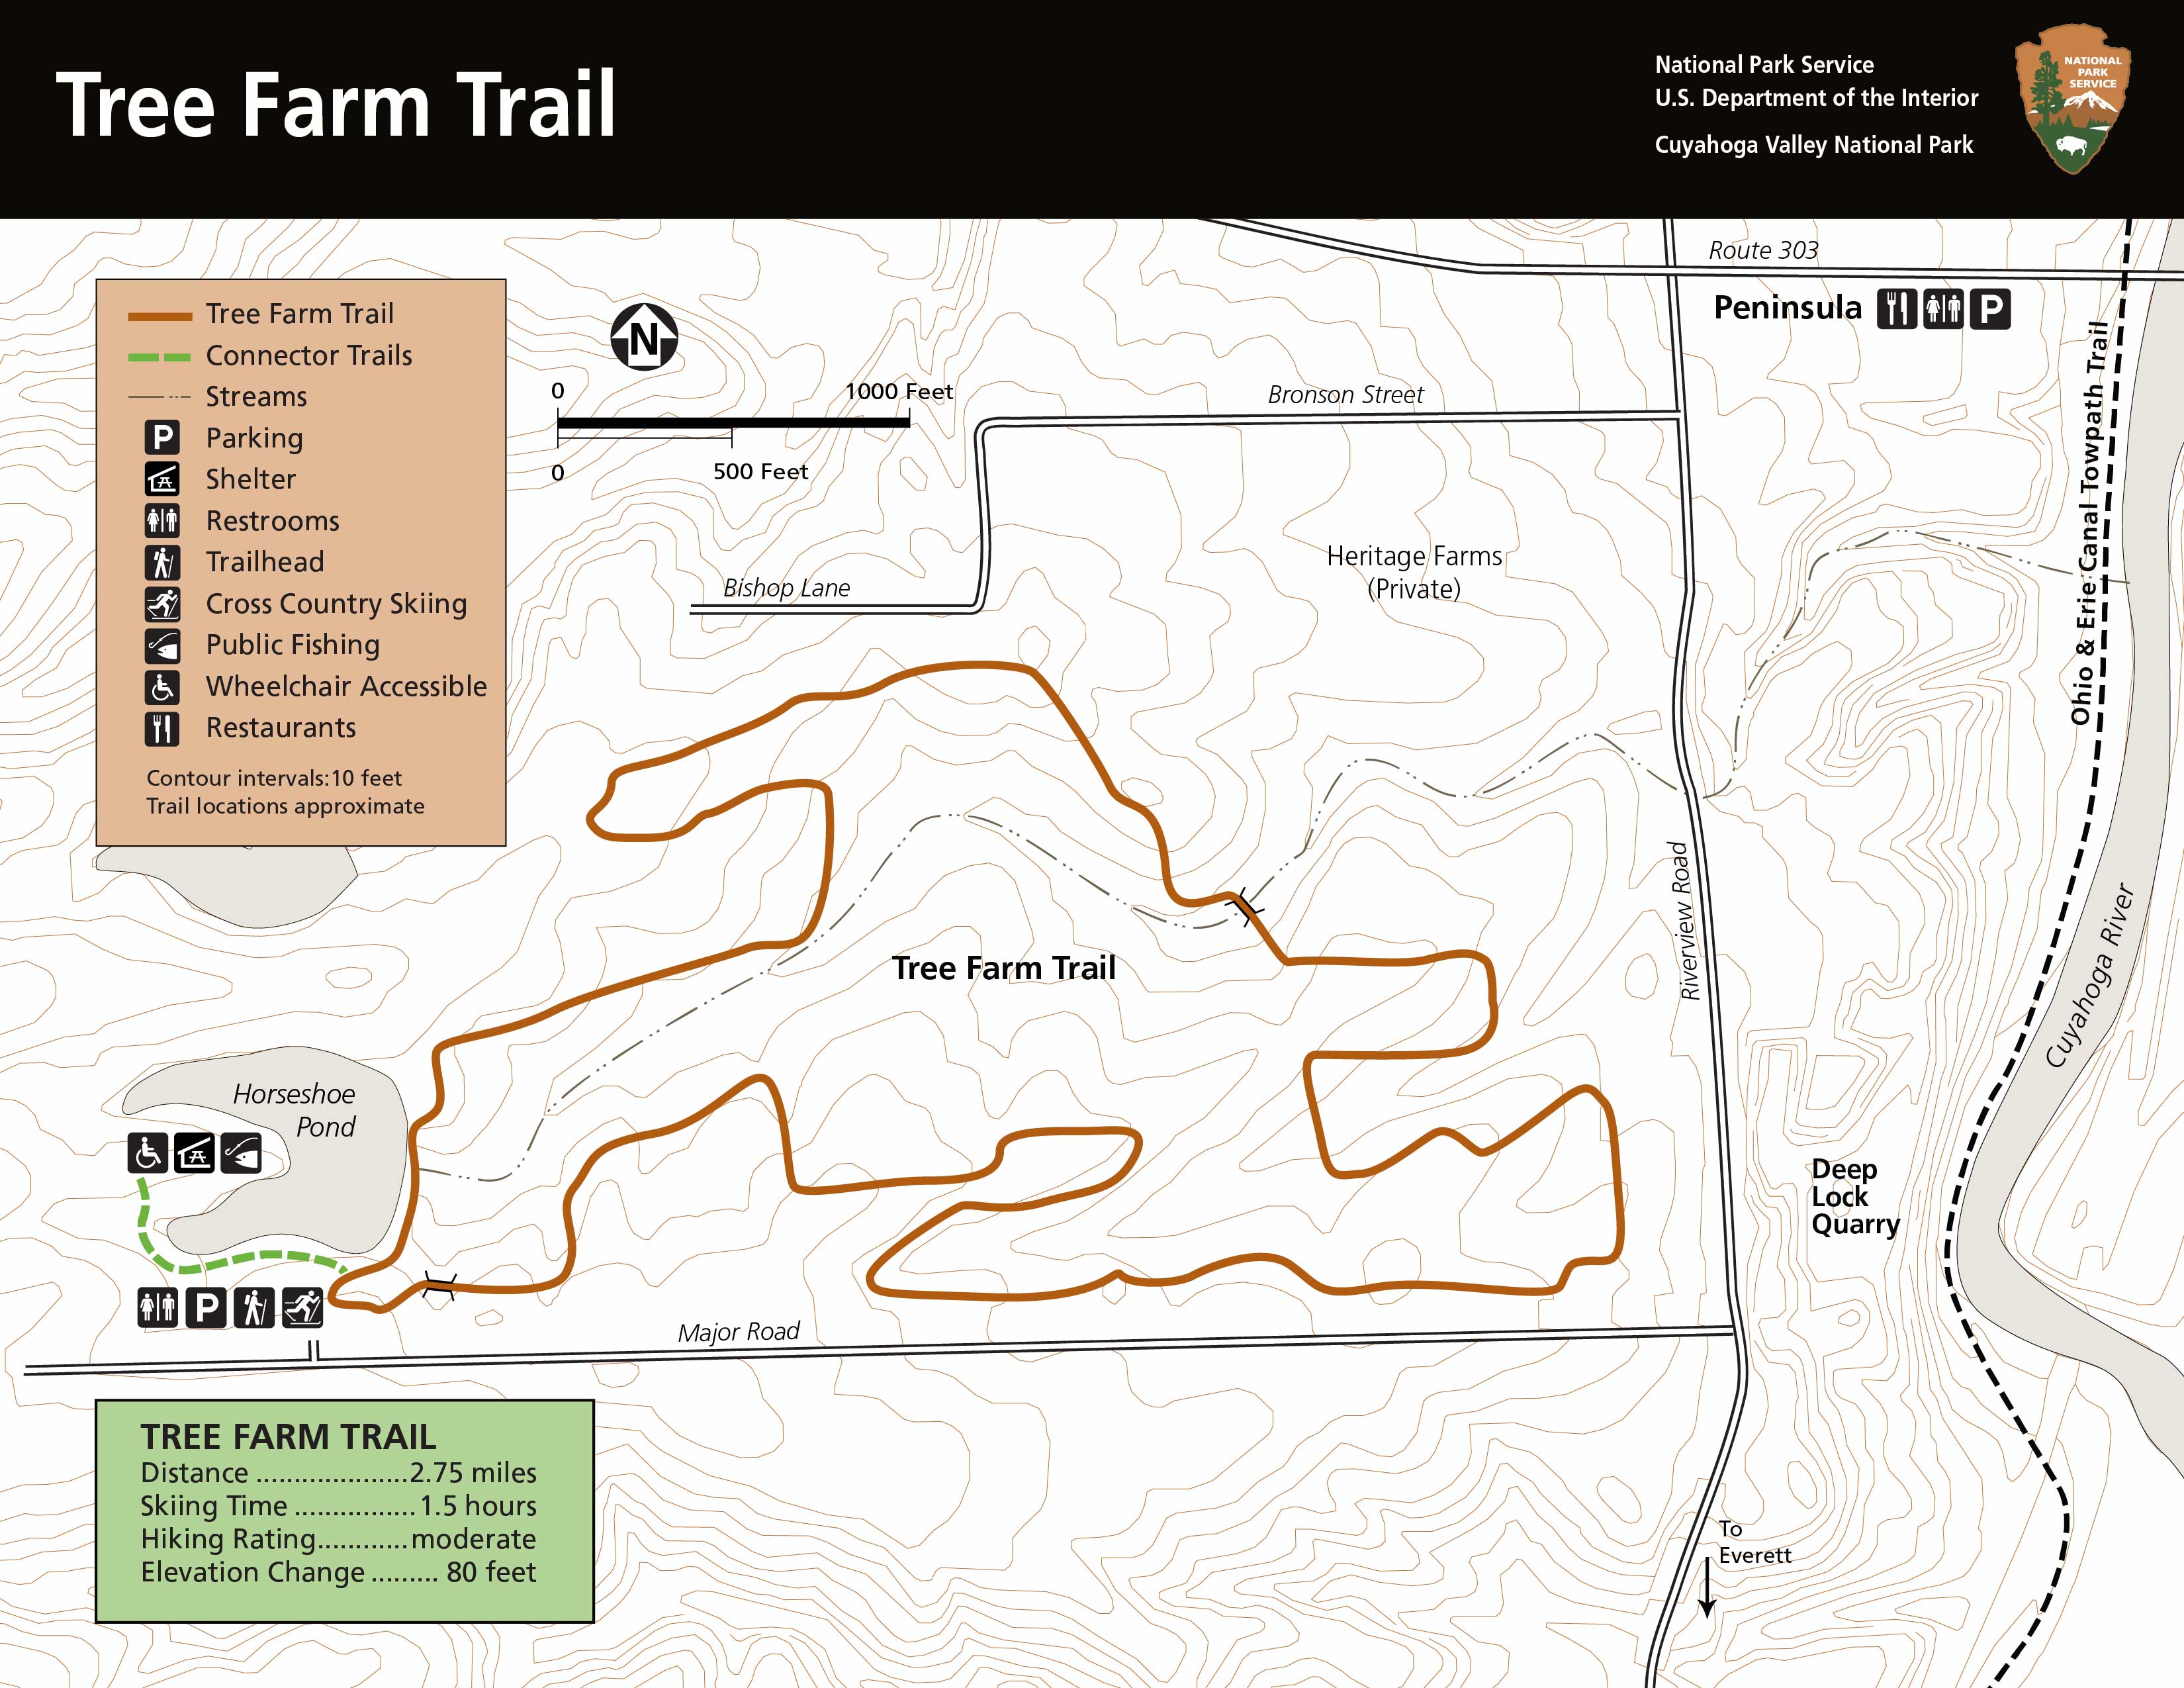 Park Map Displays 20 Mile Main Park Road Into Chapin Mesa And Wetherill Mesa. Points Of Interest Such As The Visitor Center And Lodging And Campground Are Marked On The Map As Are The Driving Loops And Historic District. - Park map displays 20 mile main park road into Chapin Mesa and Wetherill Mesa. Points of interest such as the Visitor Center and Lodging and campground are marked on the map as are the driving loops and historic district.